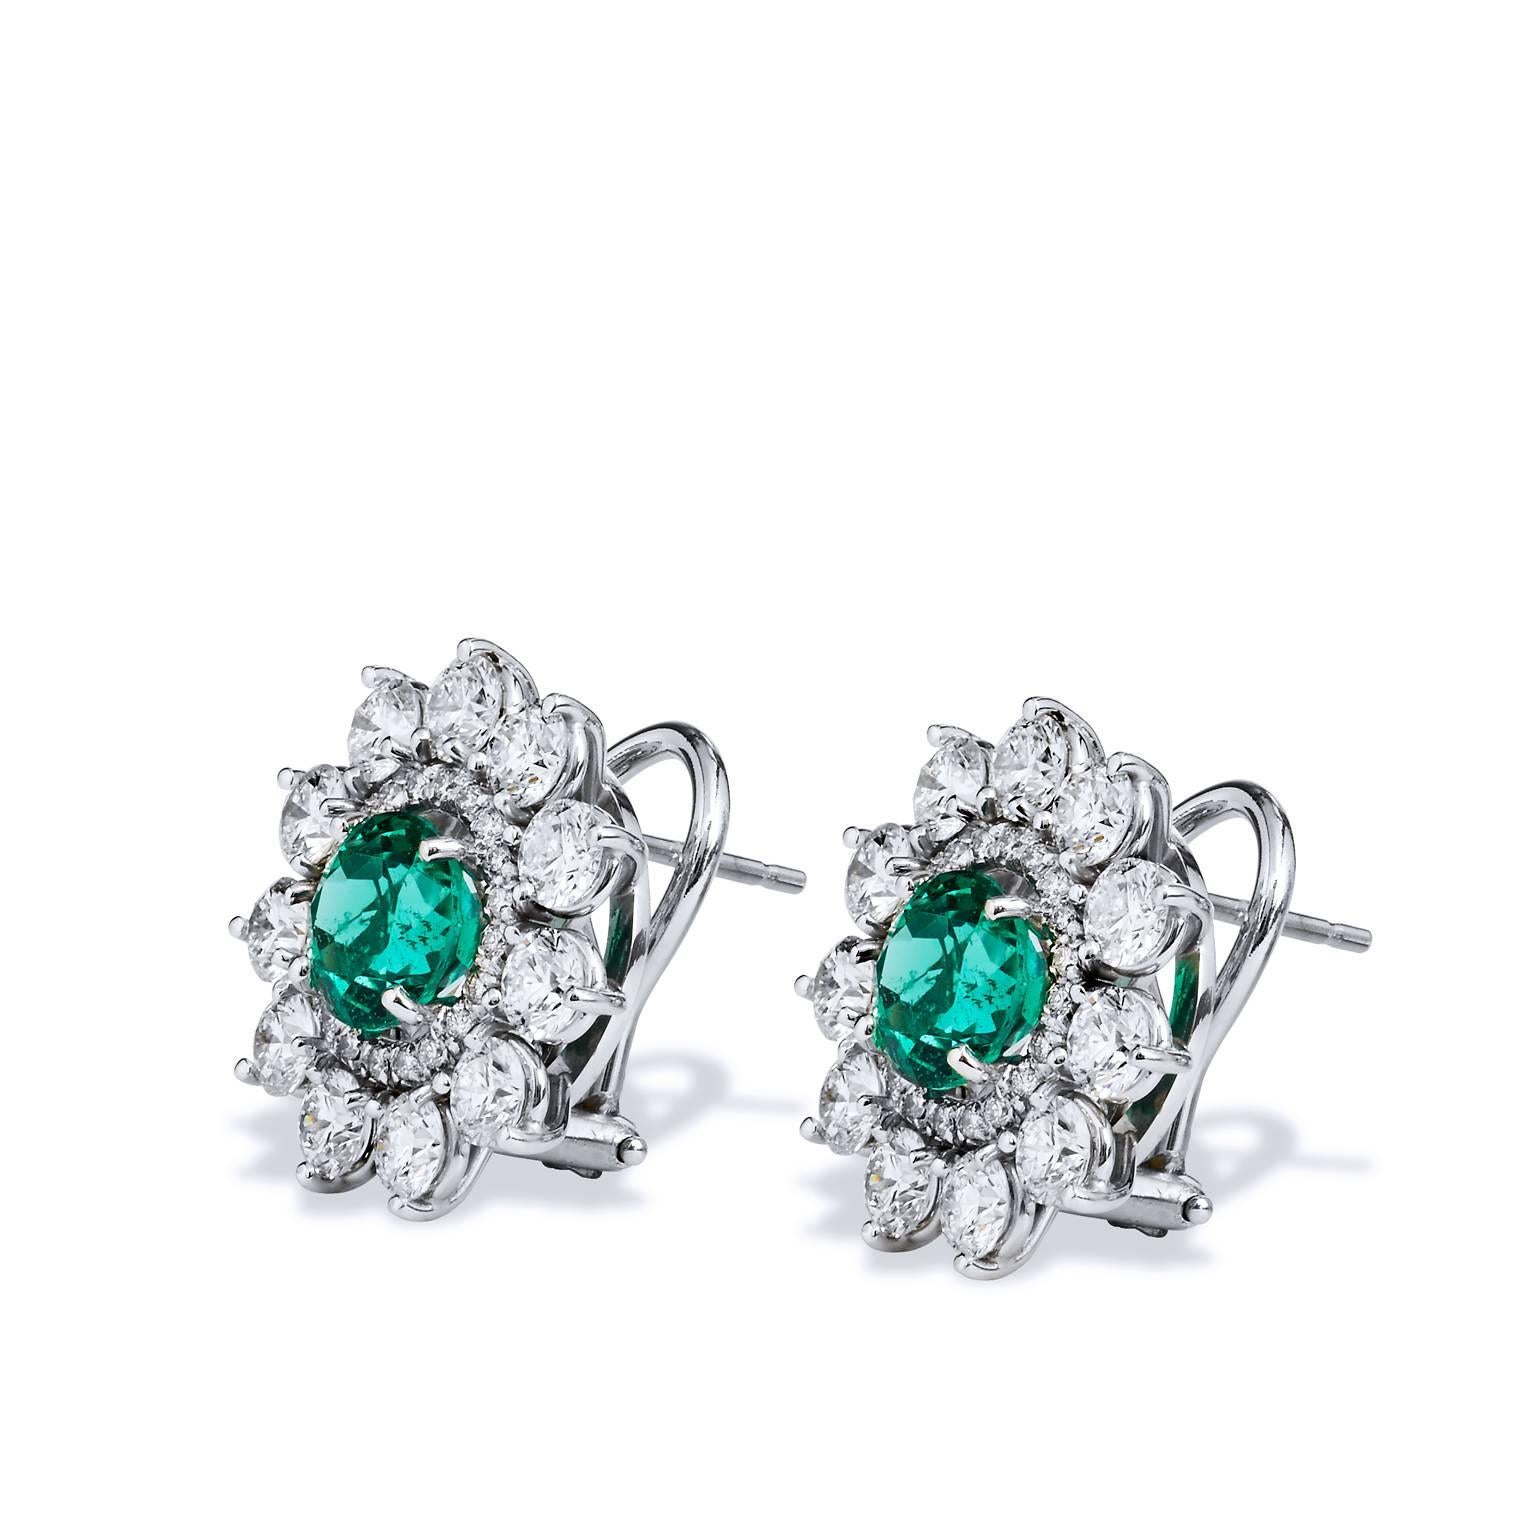 2.69 Carat Zambian Emerald with 3.46 Diamond Earrings in 18 karat White Gold

Handcrafted by H&H Jewels, these stunning earrings are created with 18 karat white palladium and feature a total of 2.69 carats of Zambian Emeralds. 

The center gemstones